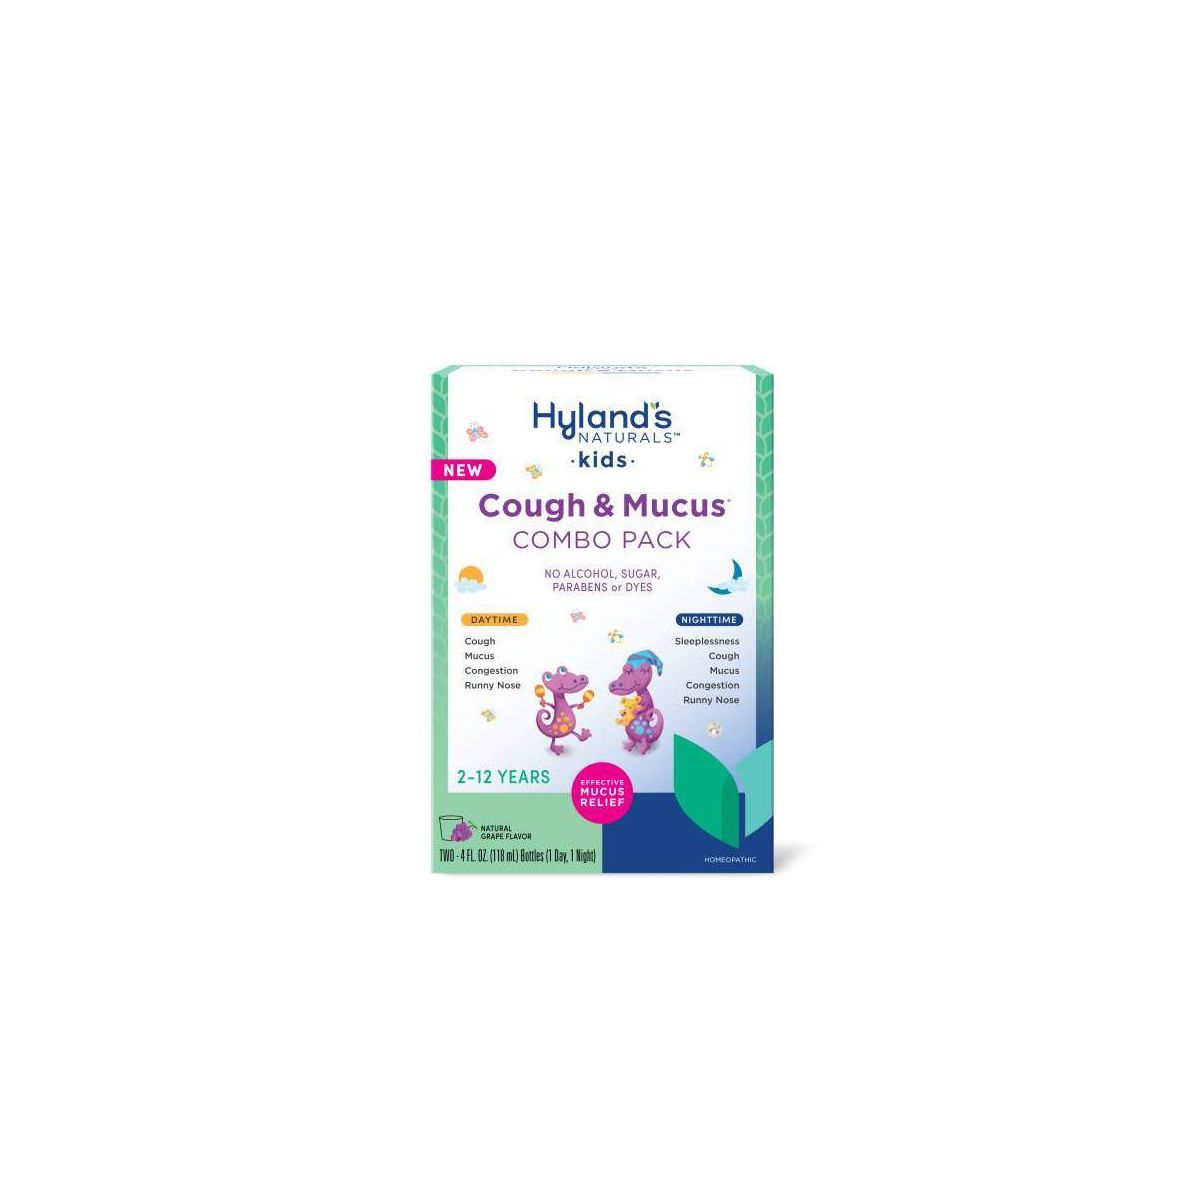 Hyland's Naturals Kids' Cough & Mucus Combo Pack Syrup - Grape - 8 fl oz | Target